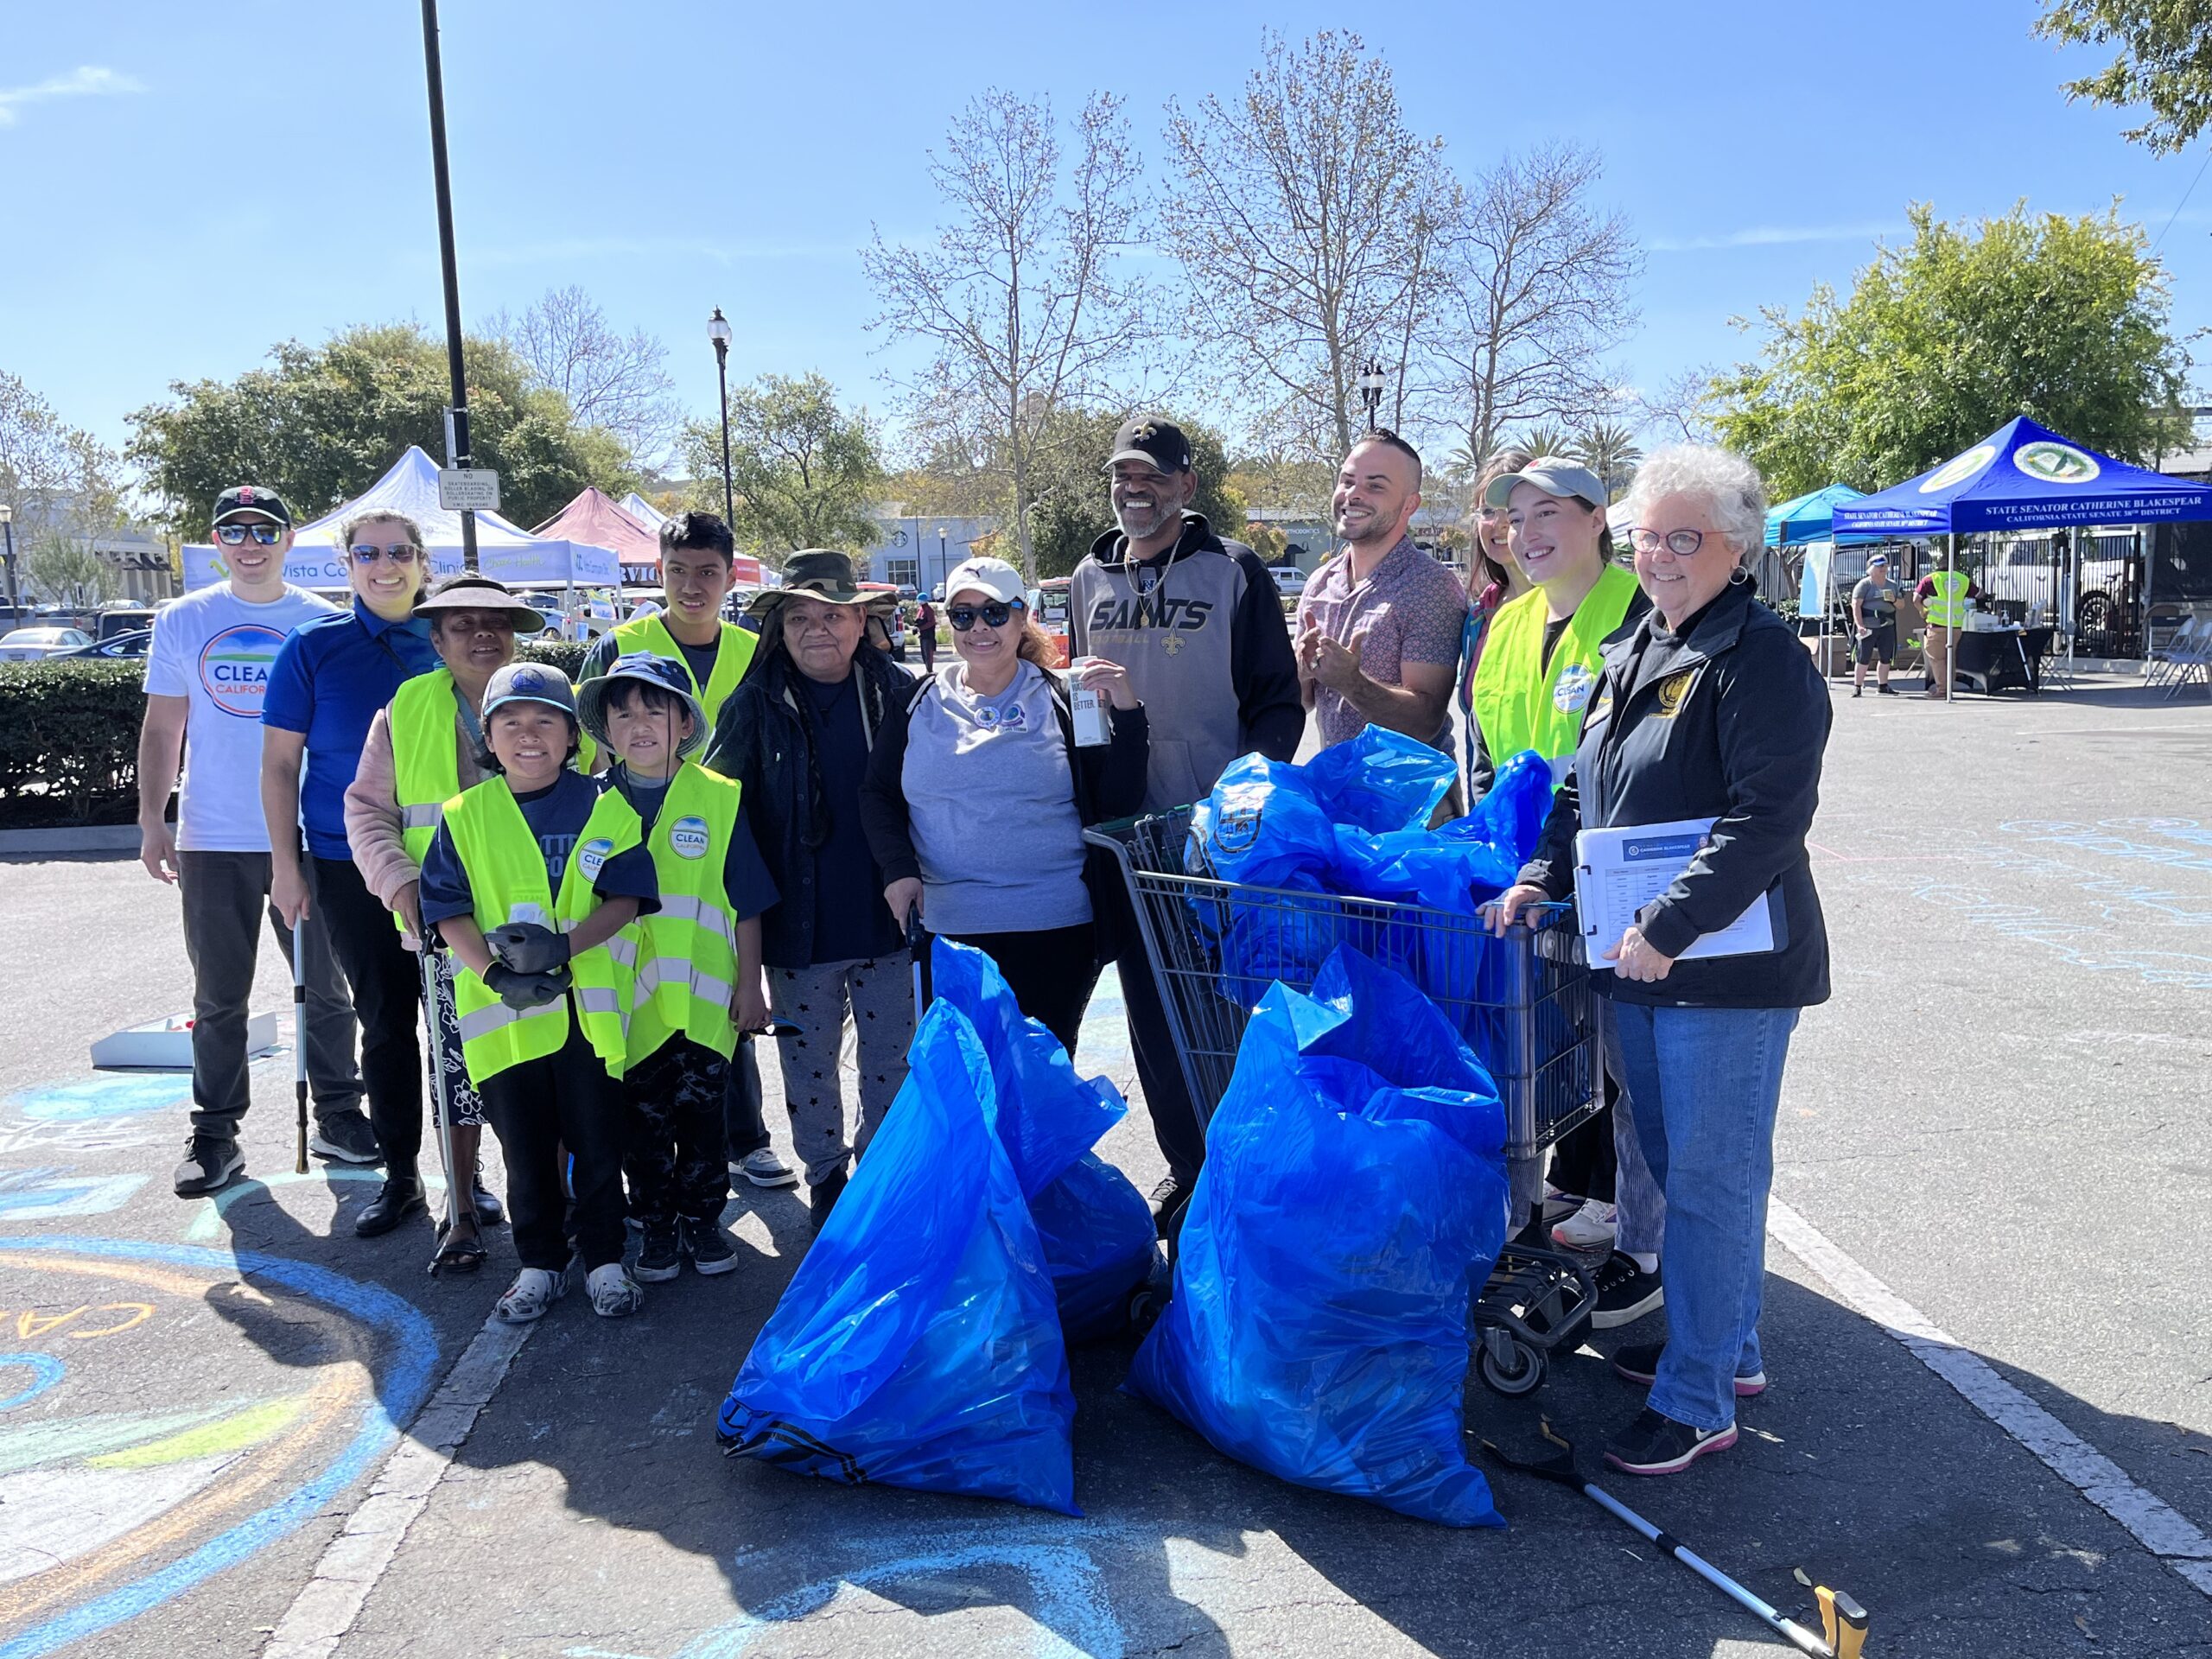 A group of people pose for a picture with several large blue trash bags with some in a shopping cart.